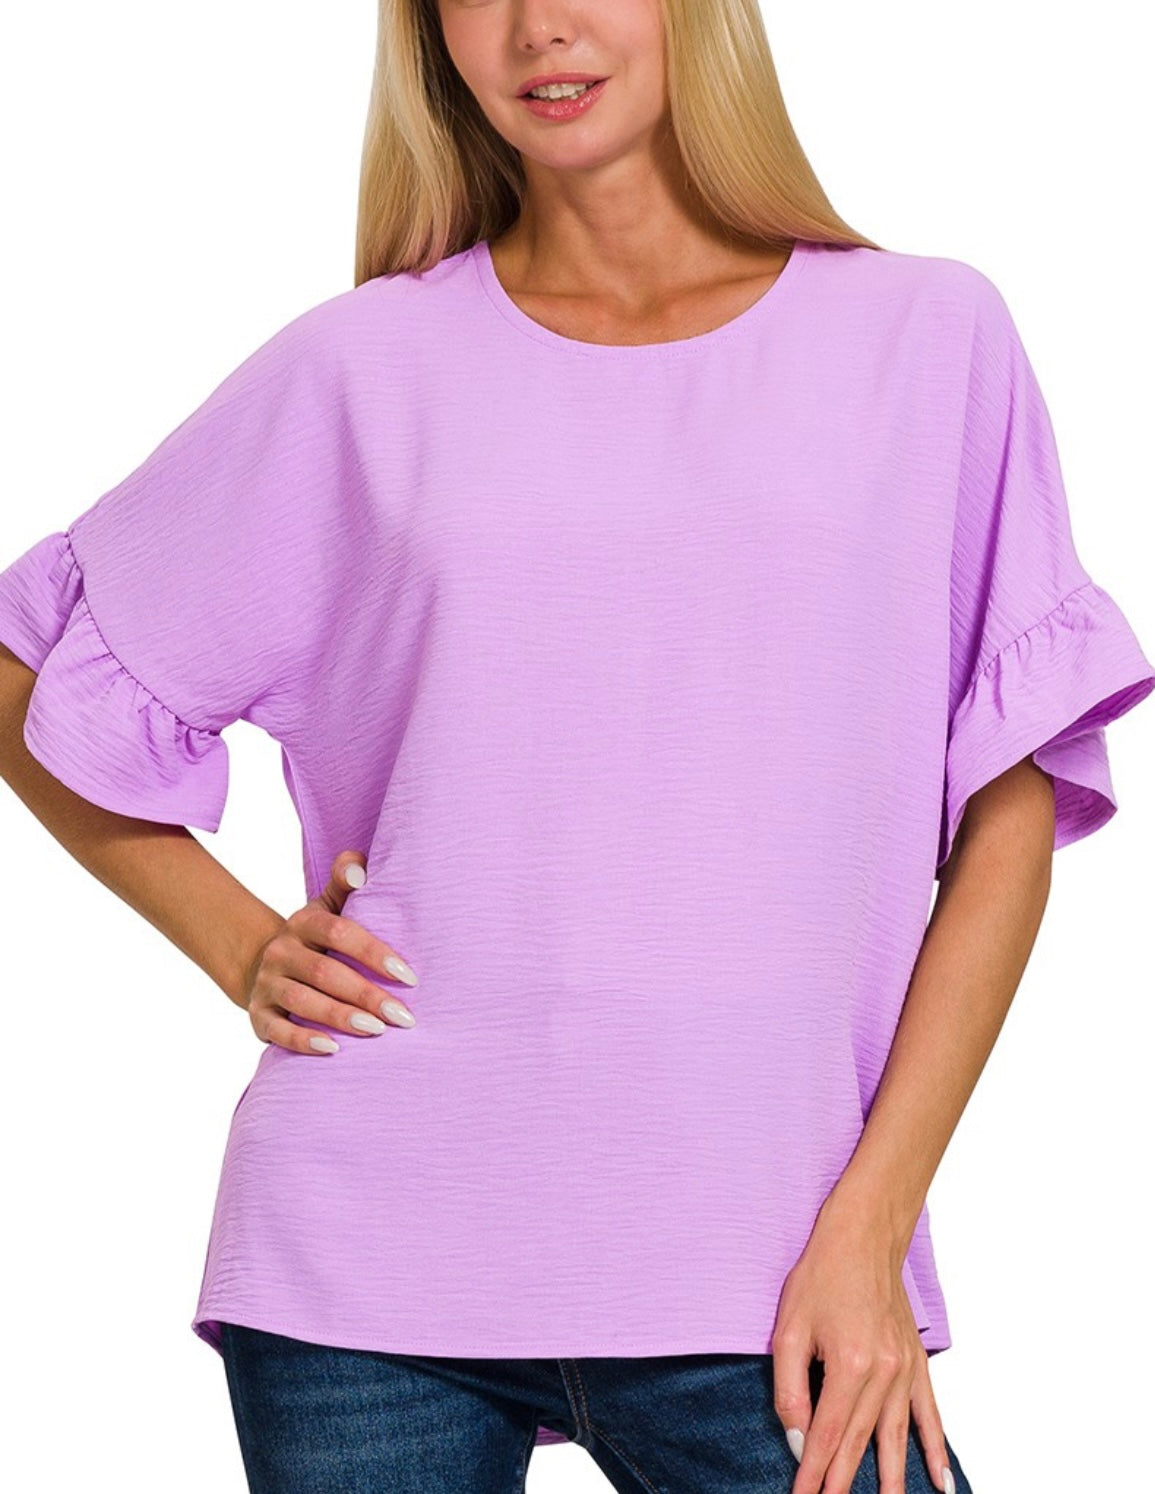 Airflow Ruffle Sleeve Blouse (2 colors)